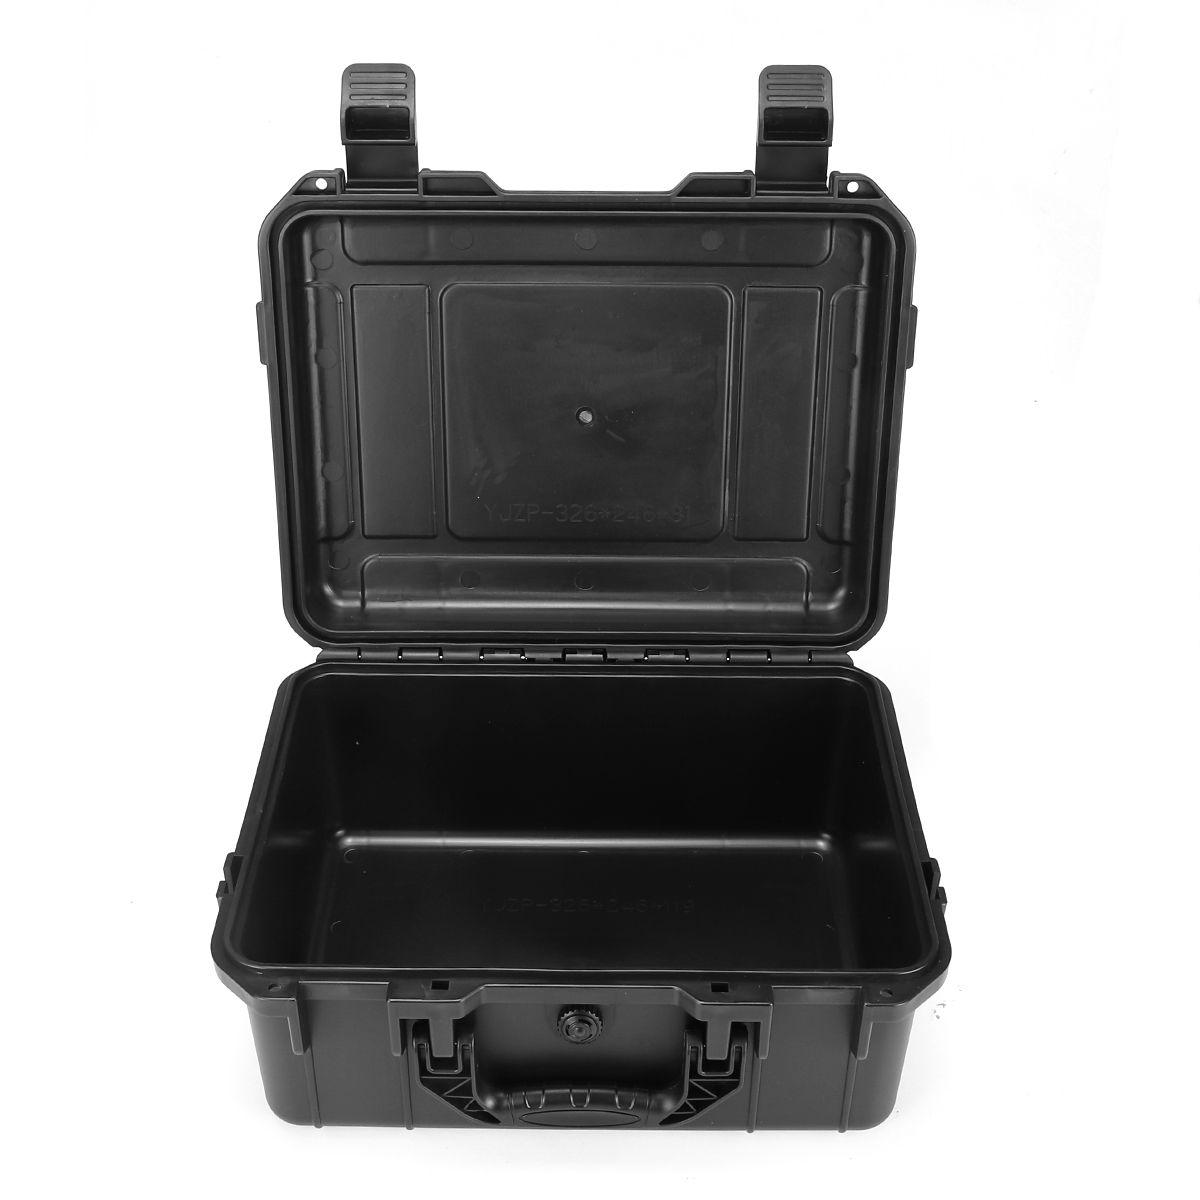 1PC-Shockproof-Sealed-Safety-Case-Toolbox-Airtight-Waterproof-Tool-Box-Instrument-Case-Dry-Box-with--1915433-7